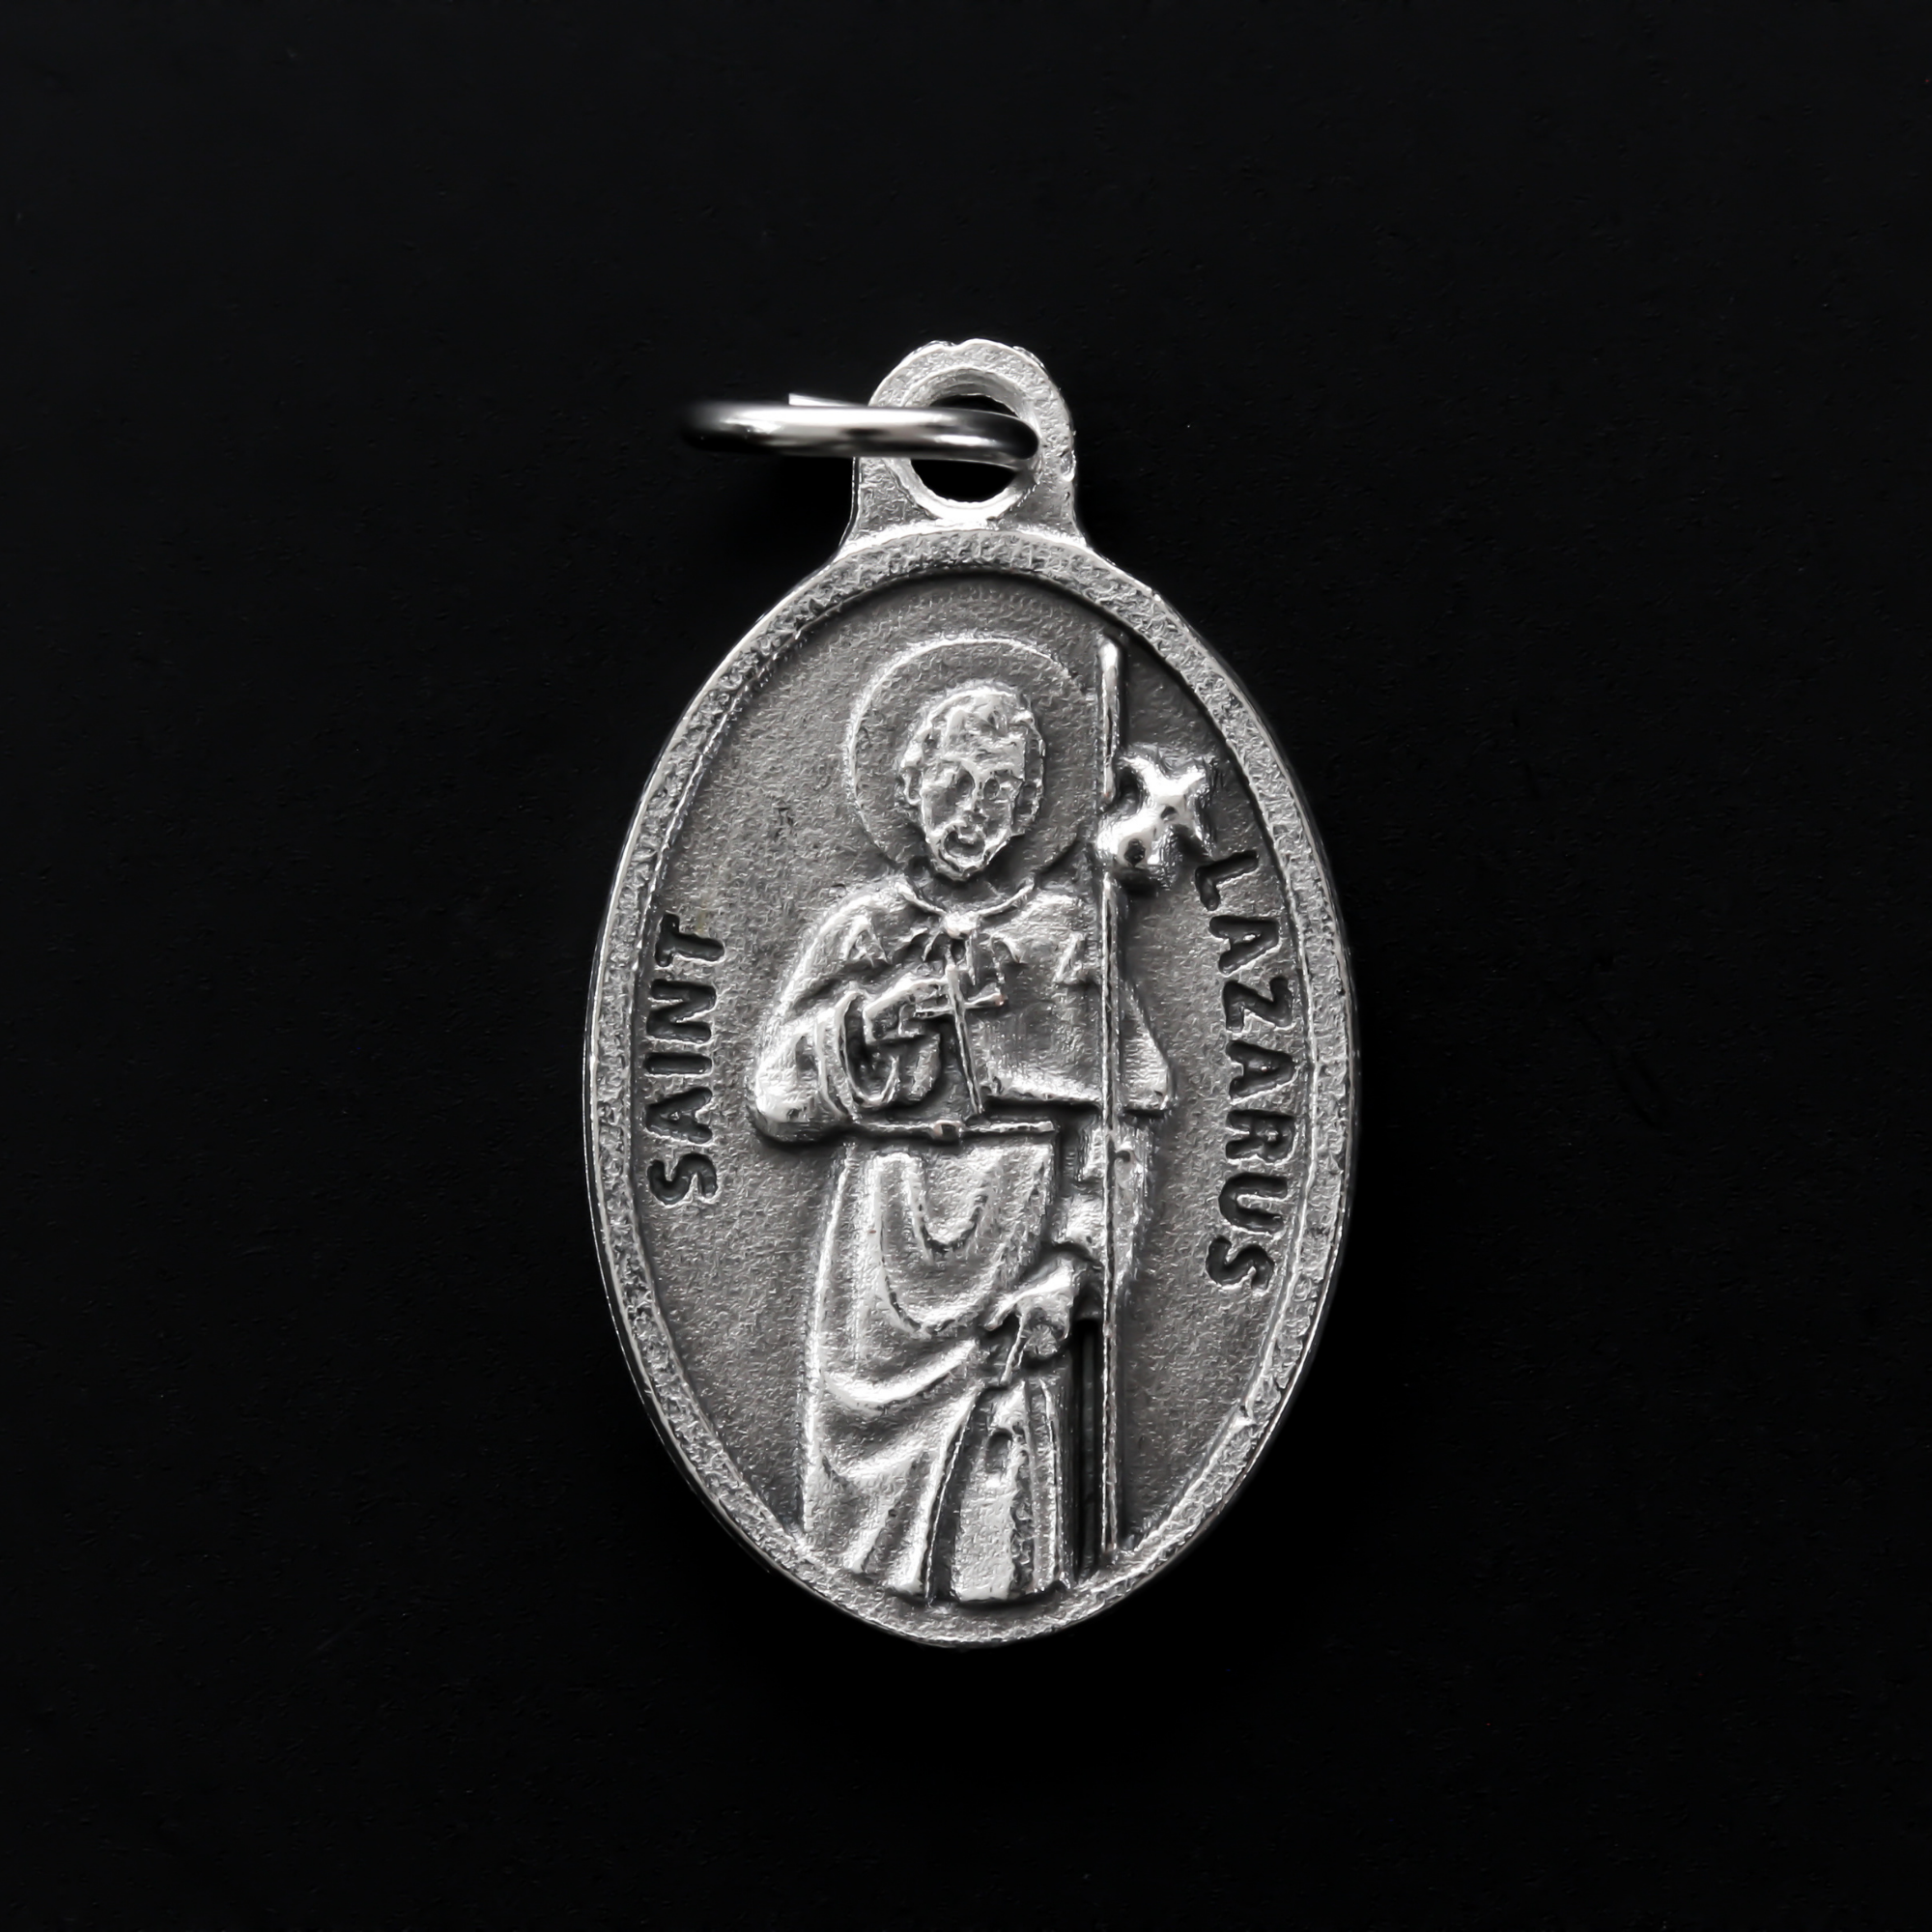 Saint Lazarus of Bethany oval medal that depicts the saint on the front and "Pray For Us" on the back.